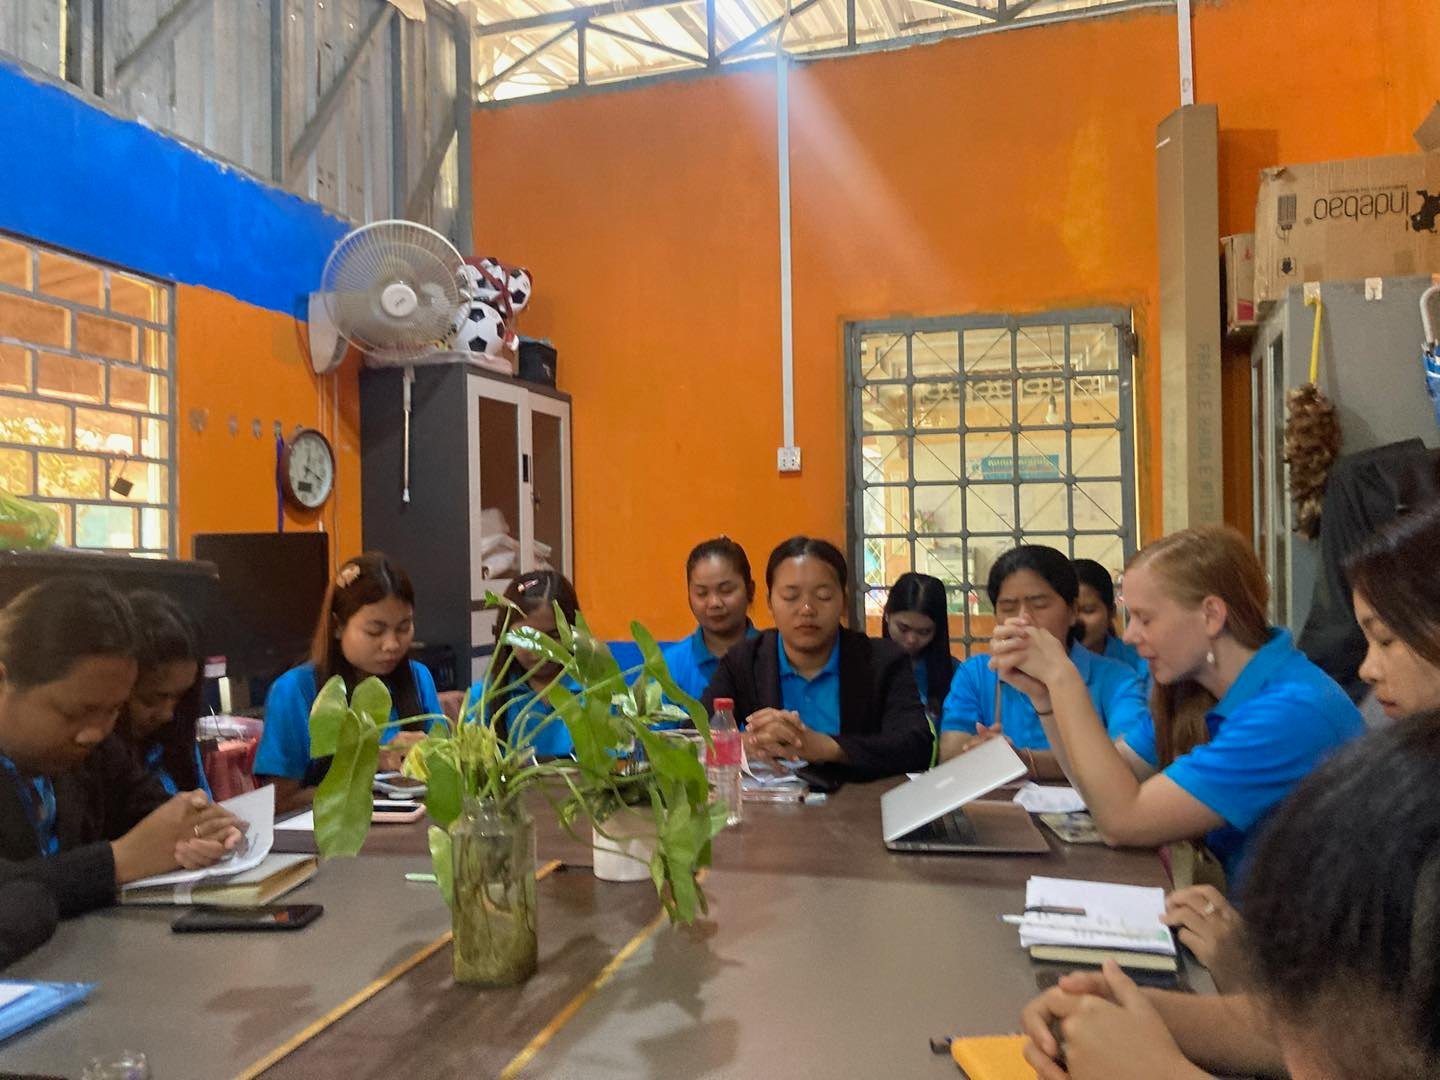 Every month, Marissa, our Instructional Support Coach in Cambodia, develops and facilitates two tracks of training for New Hope&rsquo;s teachers! Marissa is doing an incredible job pouring into the team and New Hope&rsquo;s teachers are hungry to lea